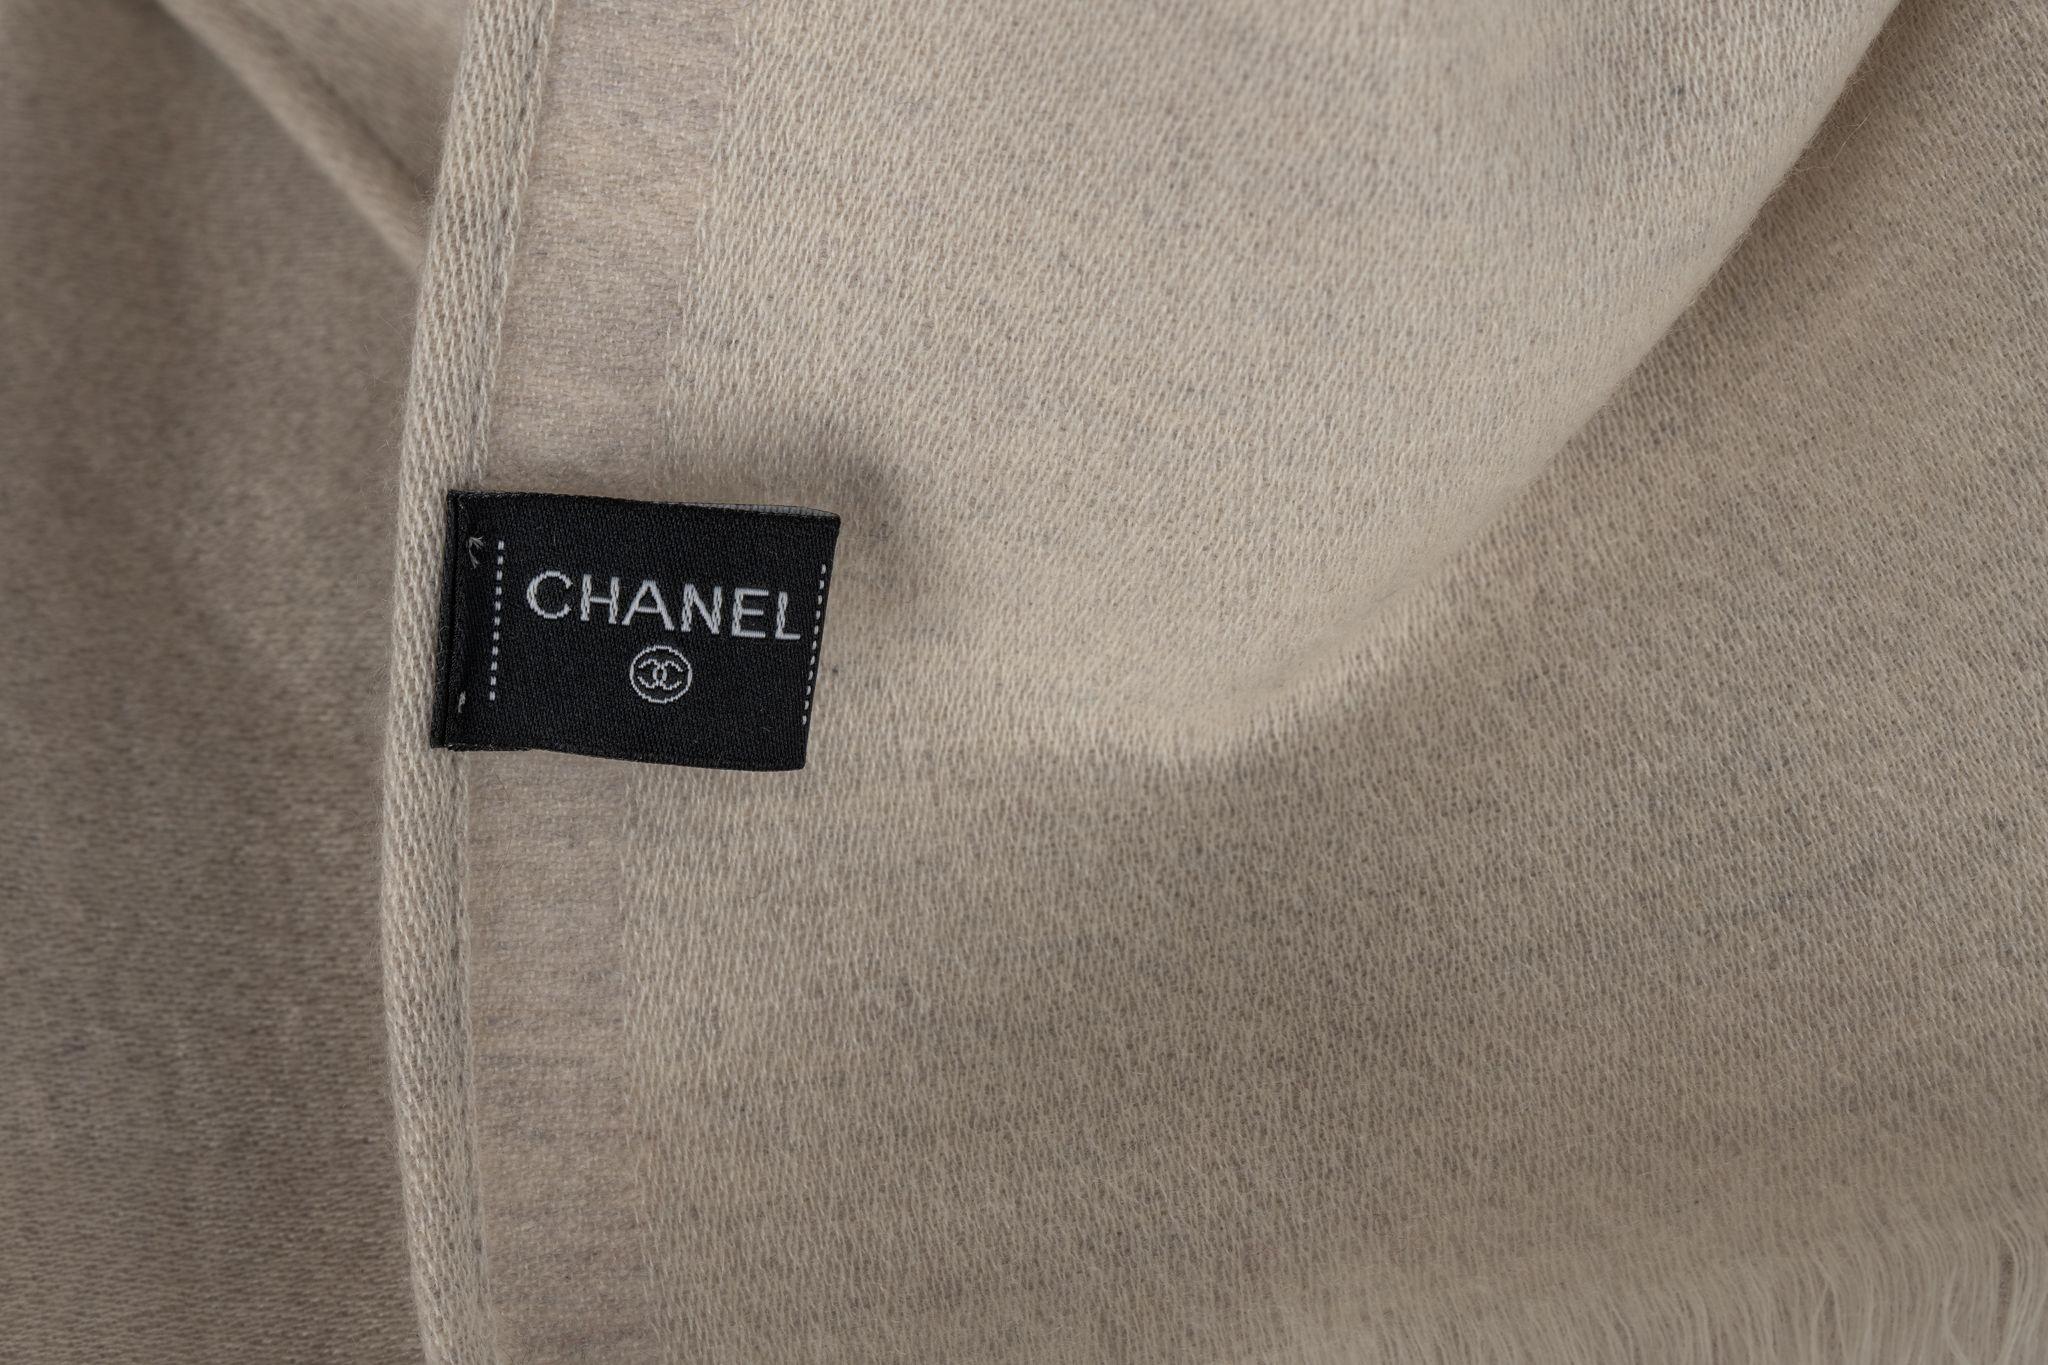 Chanel Cashmere Creme Shawl In Excellent Condition For Sale In West Hollywood, CA